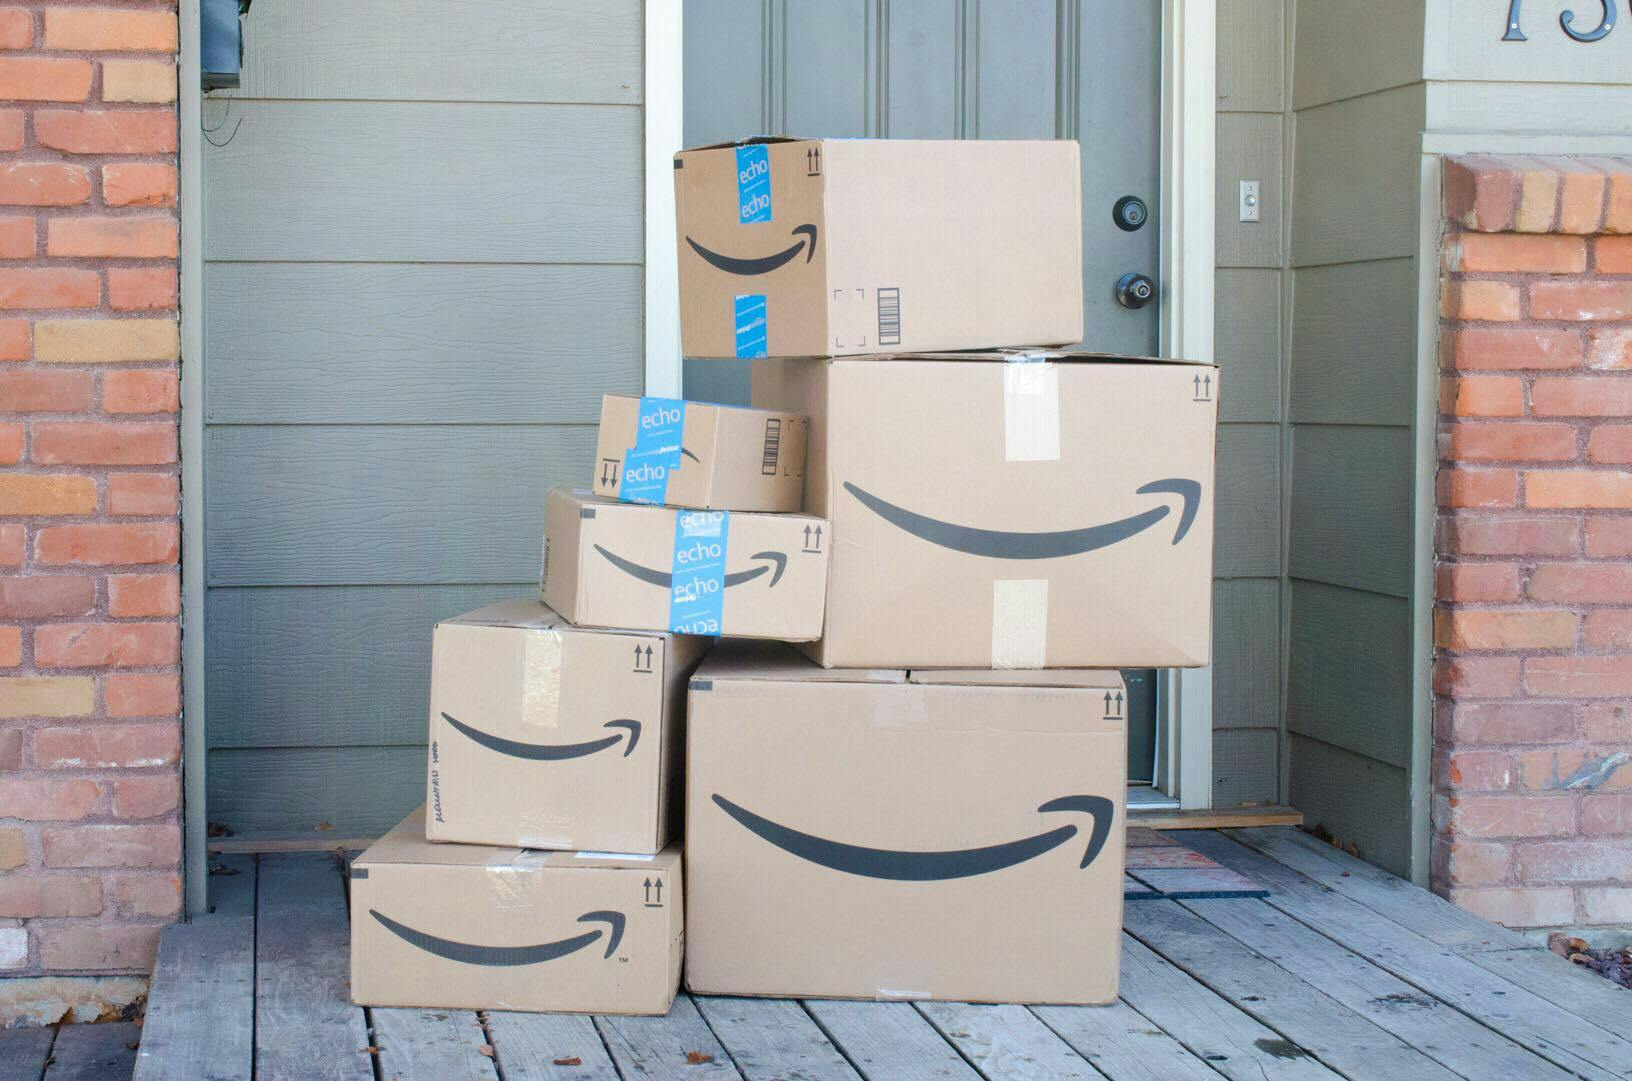 Amazon Empty Package In 2022 (What To Do, Refunds + More)